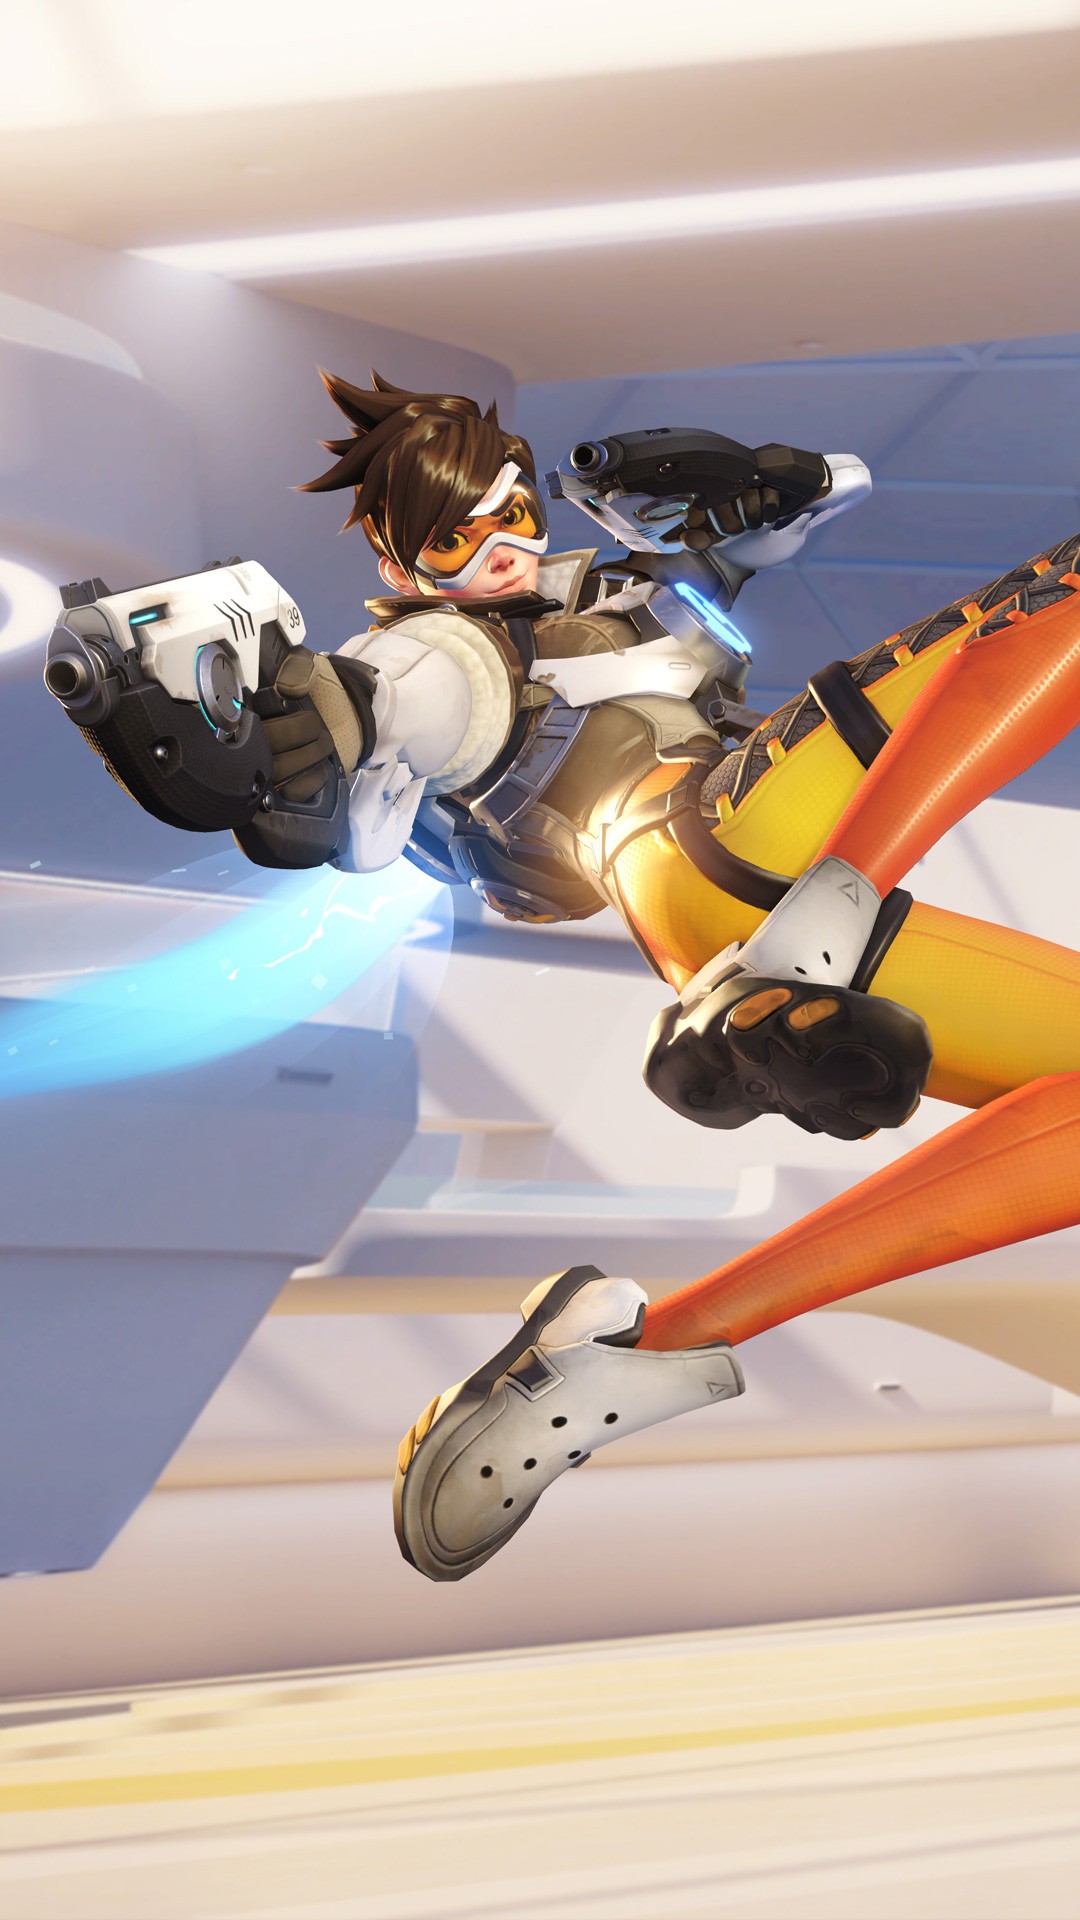 overwatch iphone wallpaper,cartoon,anime,action figure,animation,fictional character